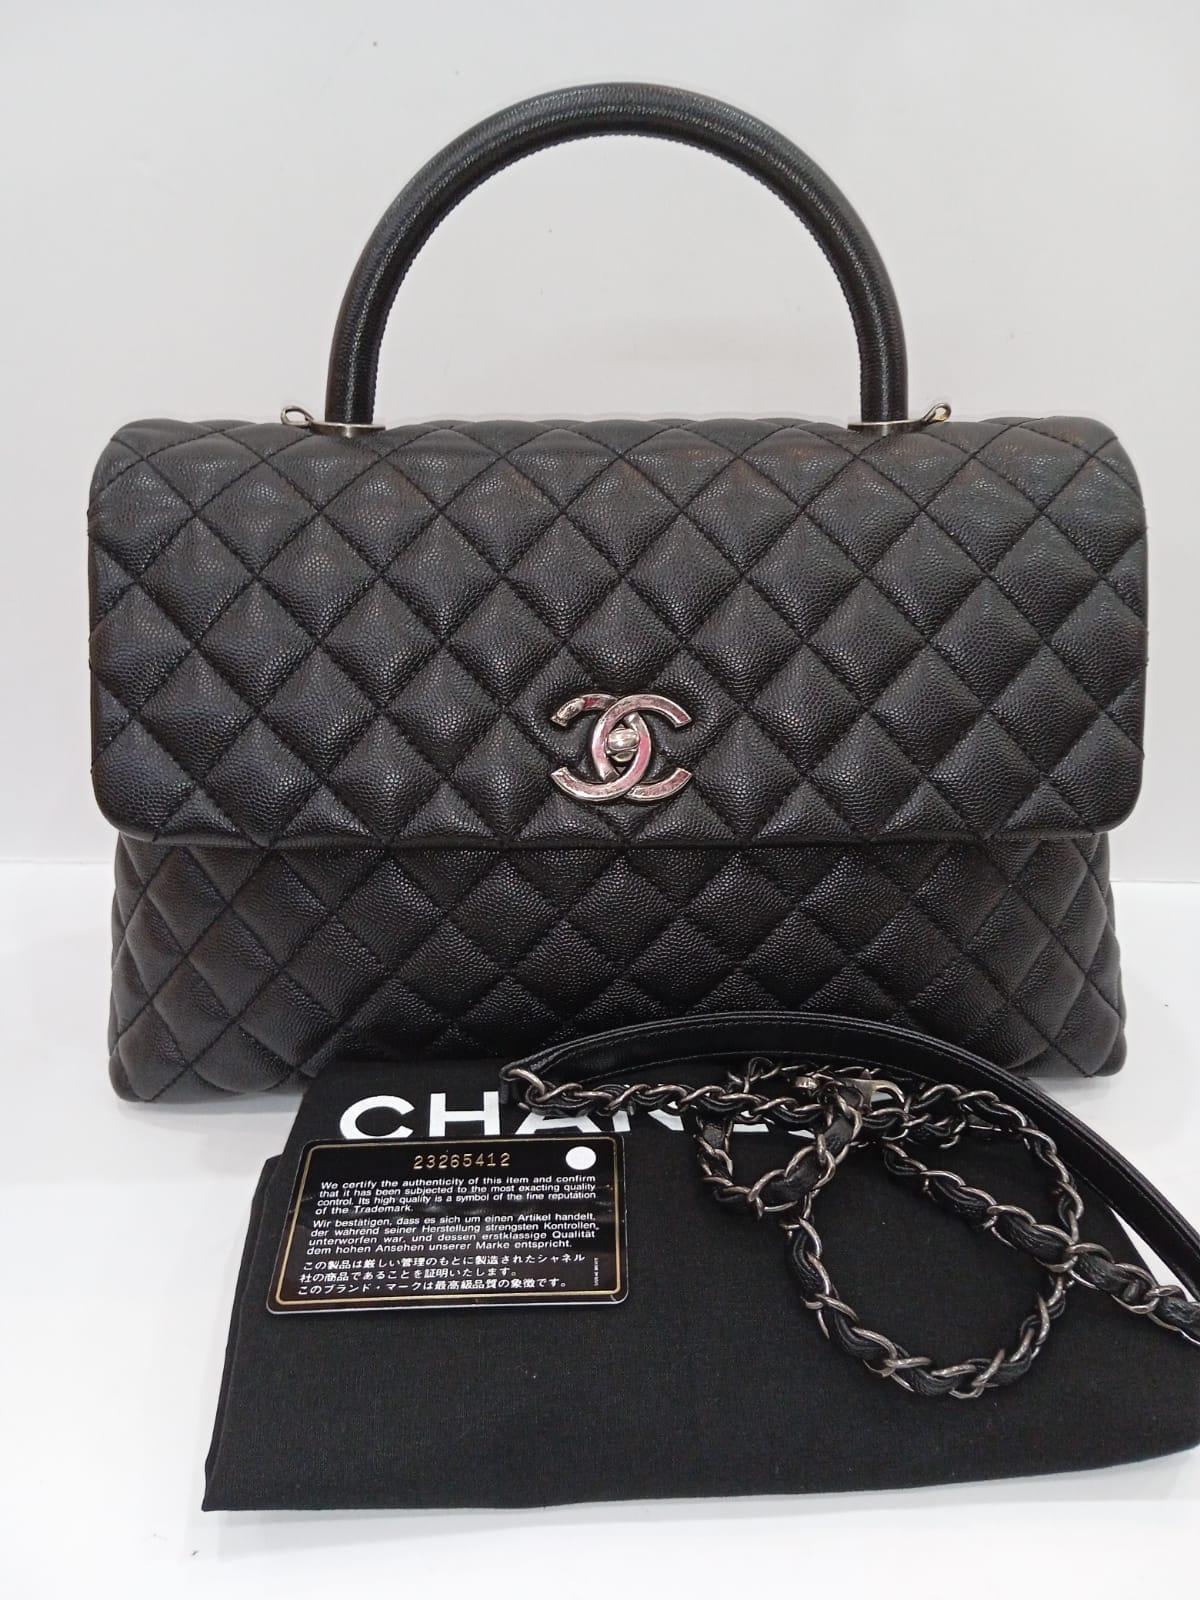 Chanel Black Caviar Quilted Large Coco Handle SHW Bag 3